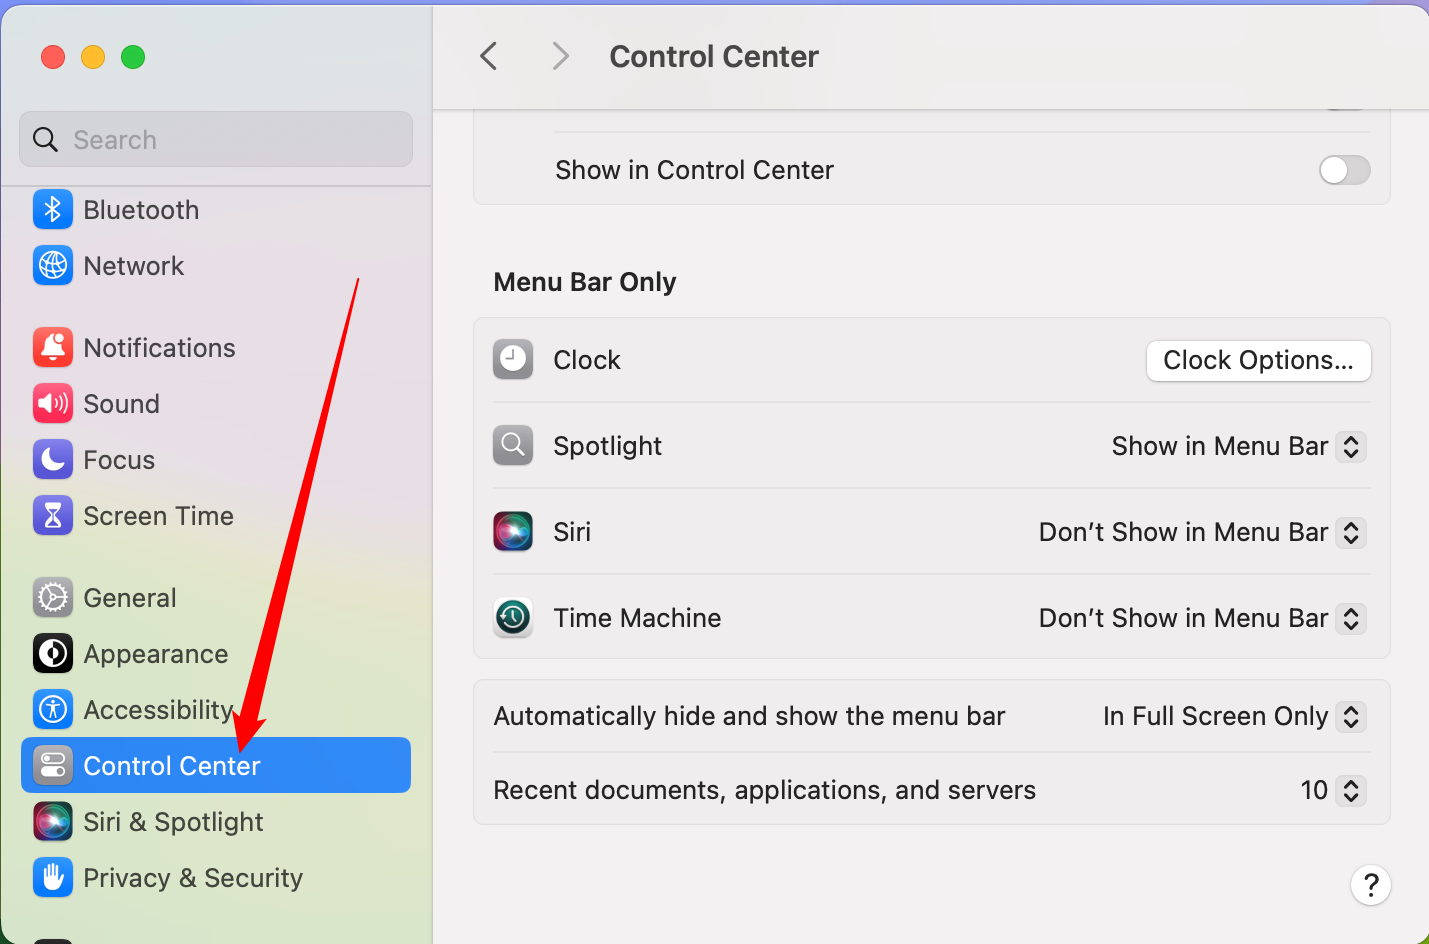 Scroll down and select 'Control Center.'